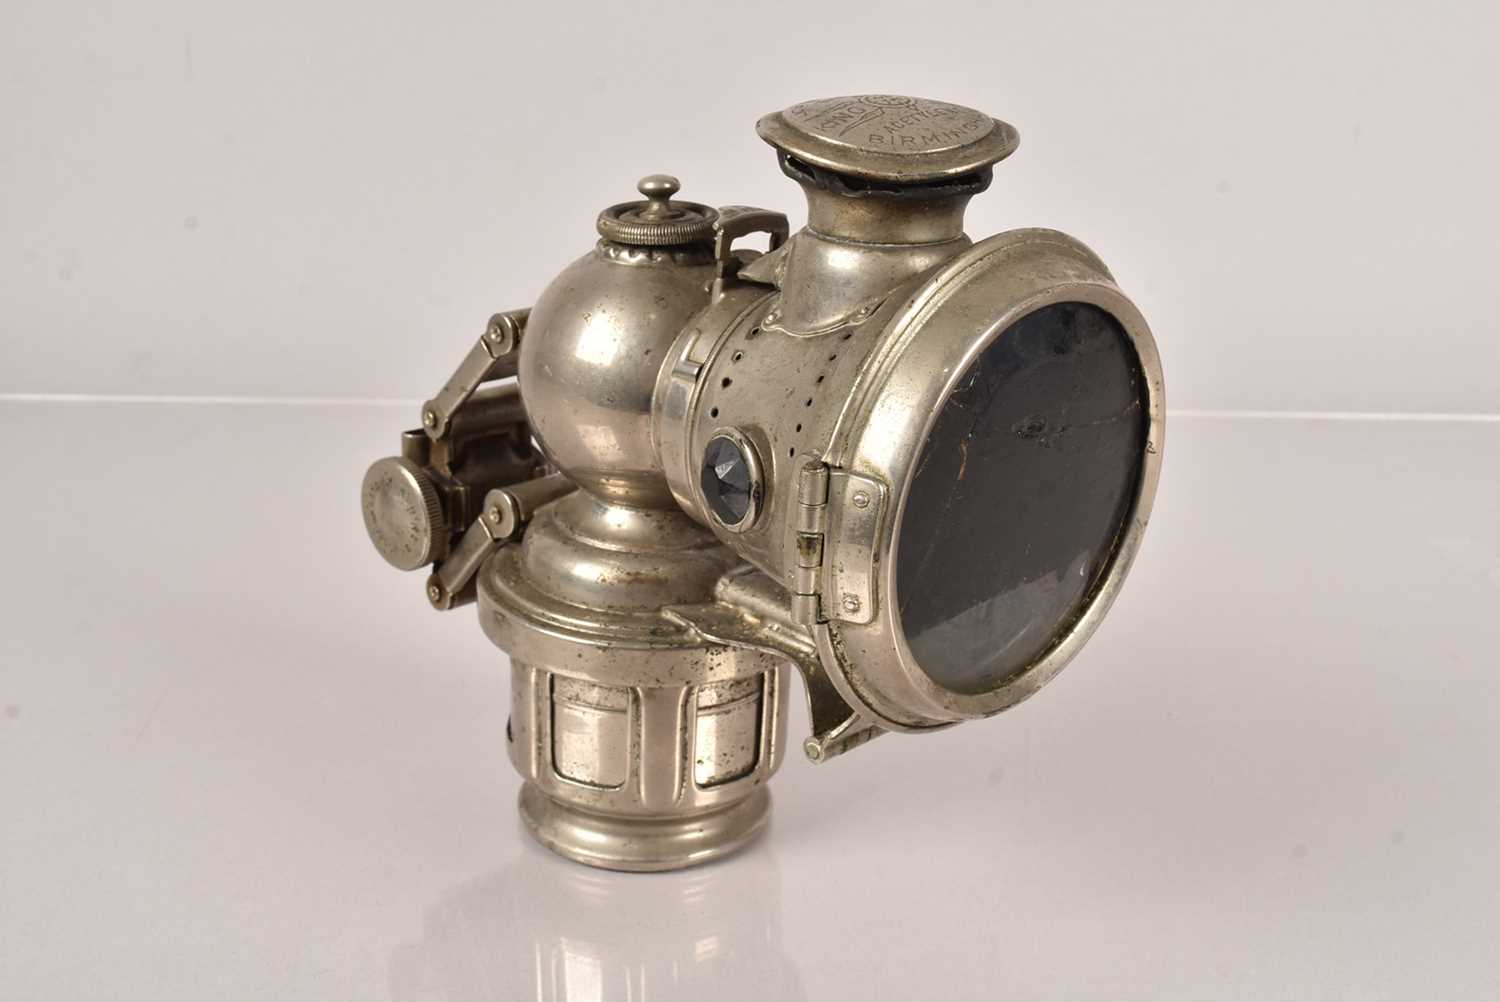 A Lucas 'King of the Road' Acetylene head lamp,